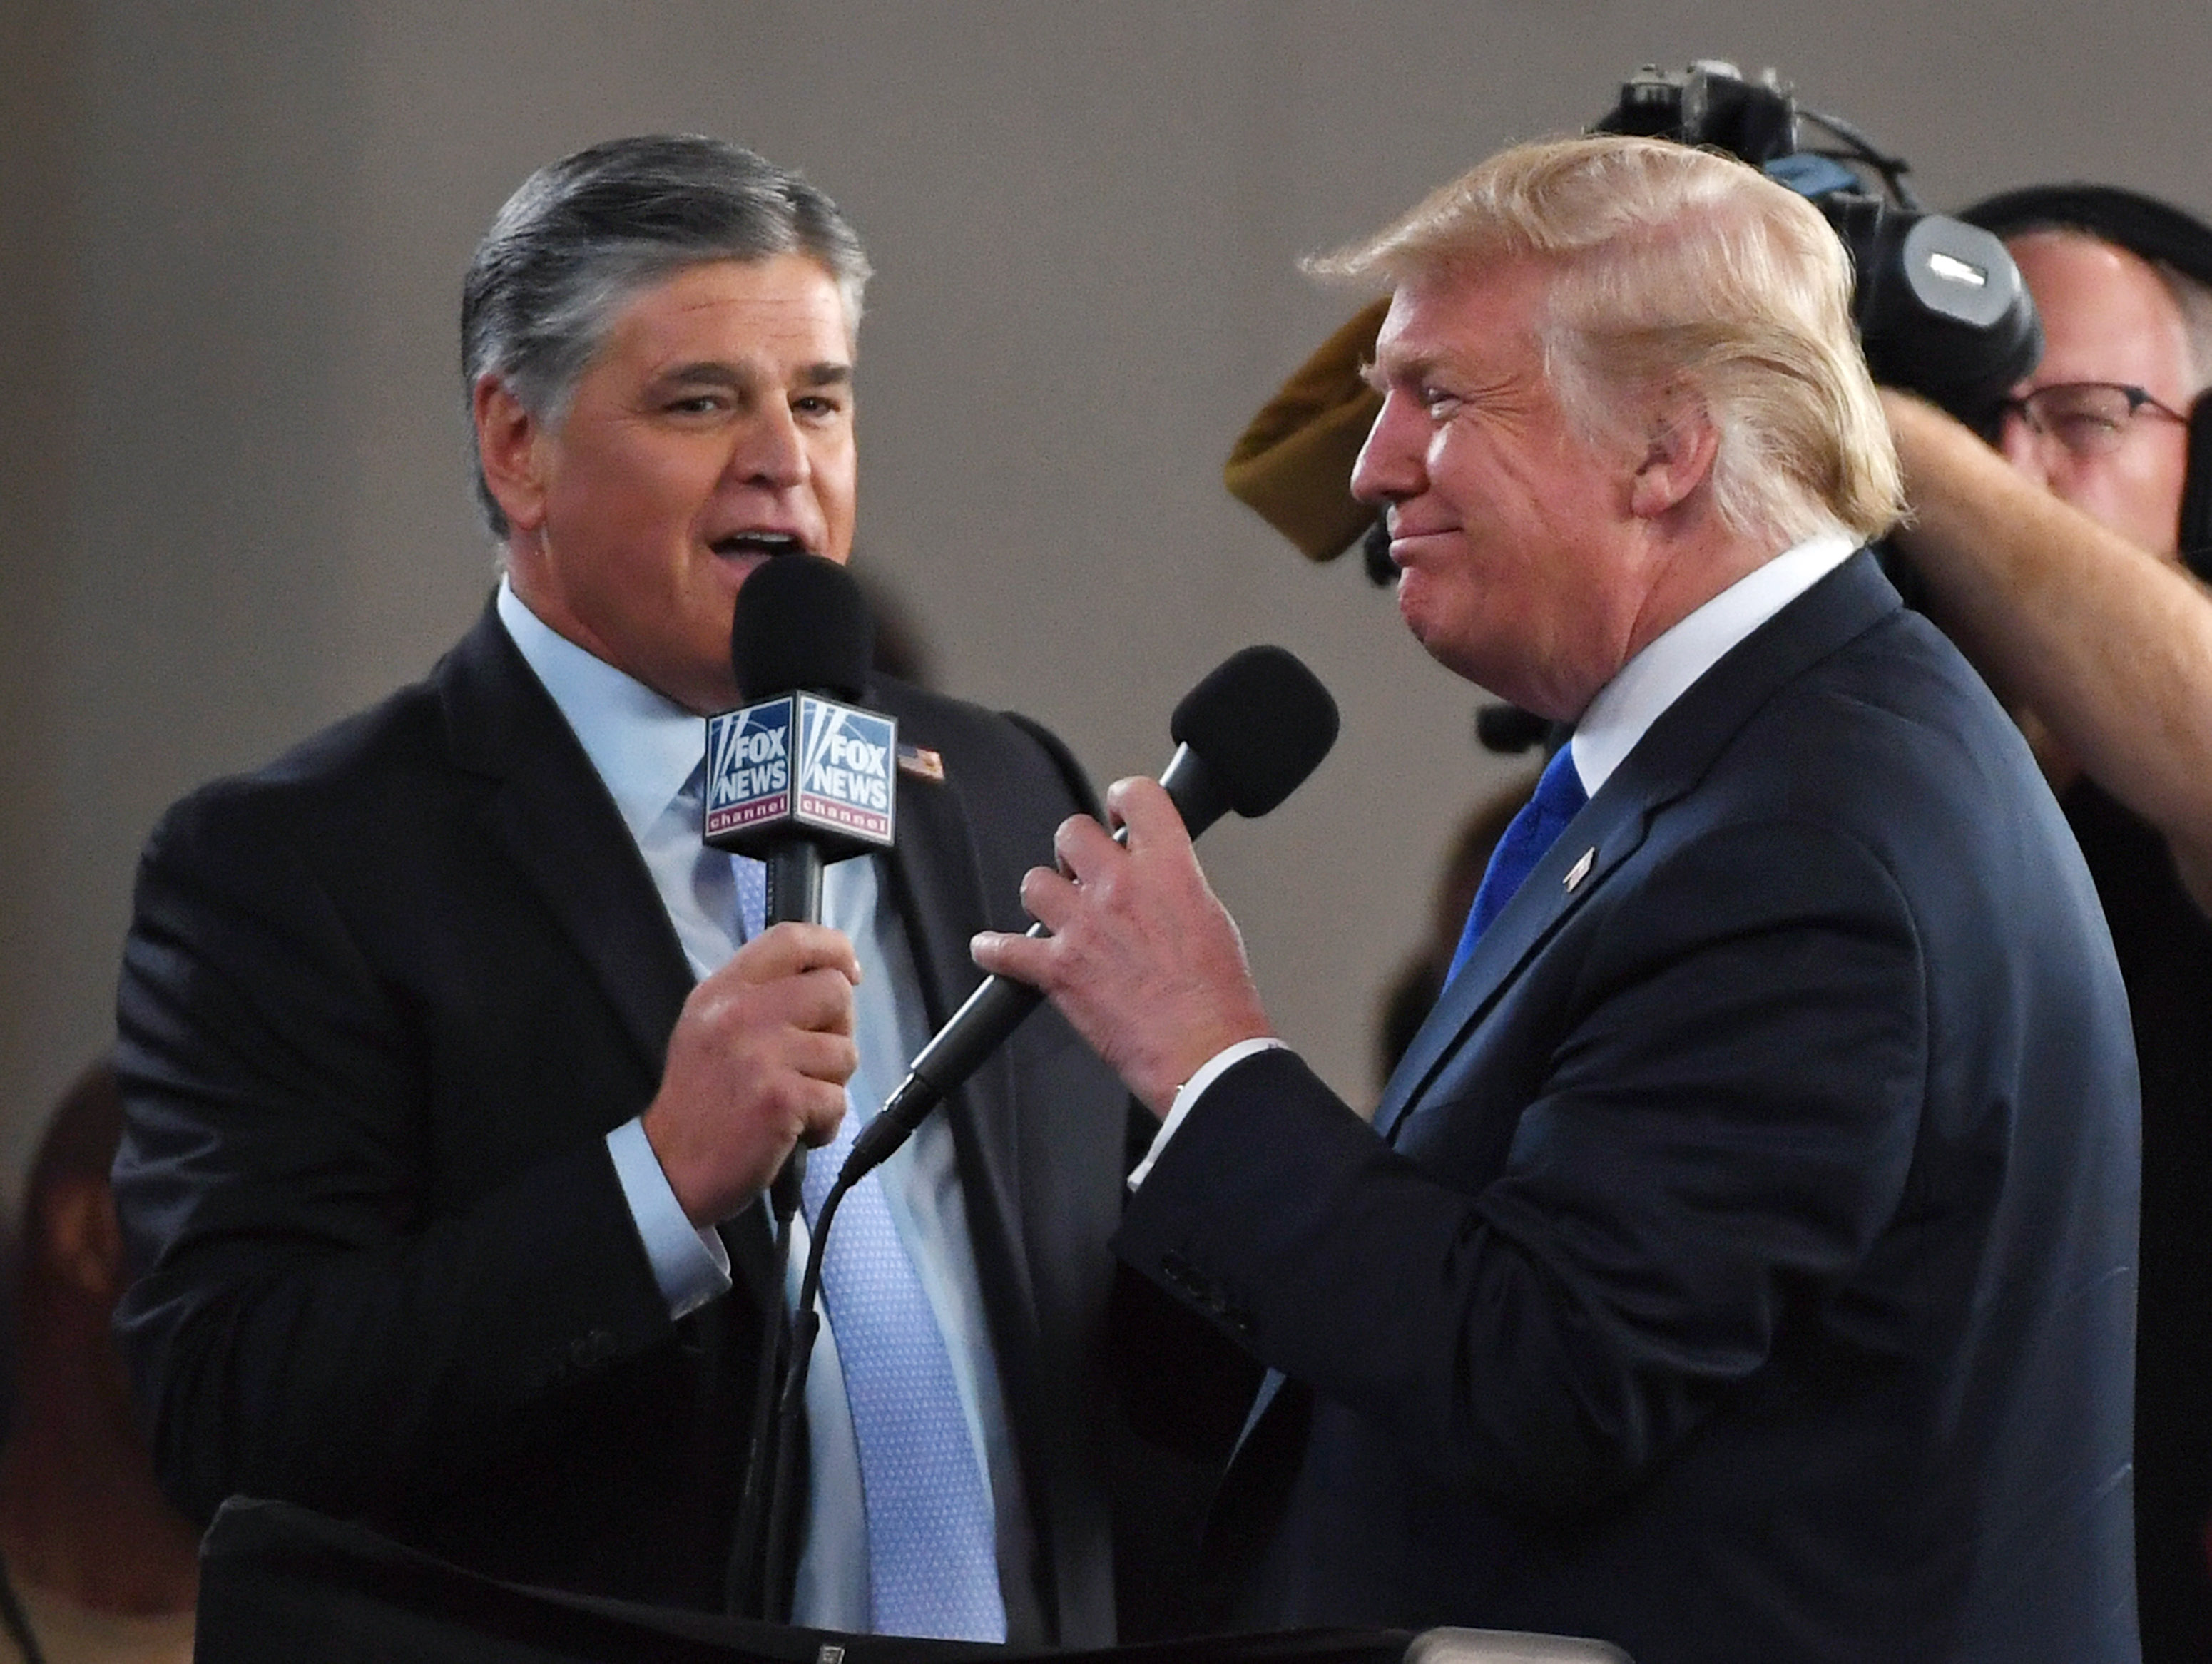 Sean Hannity with Donald Trump